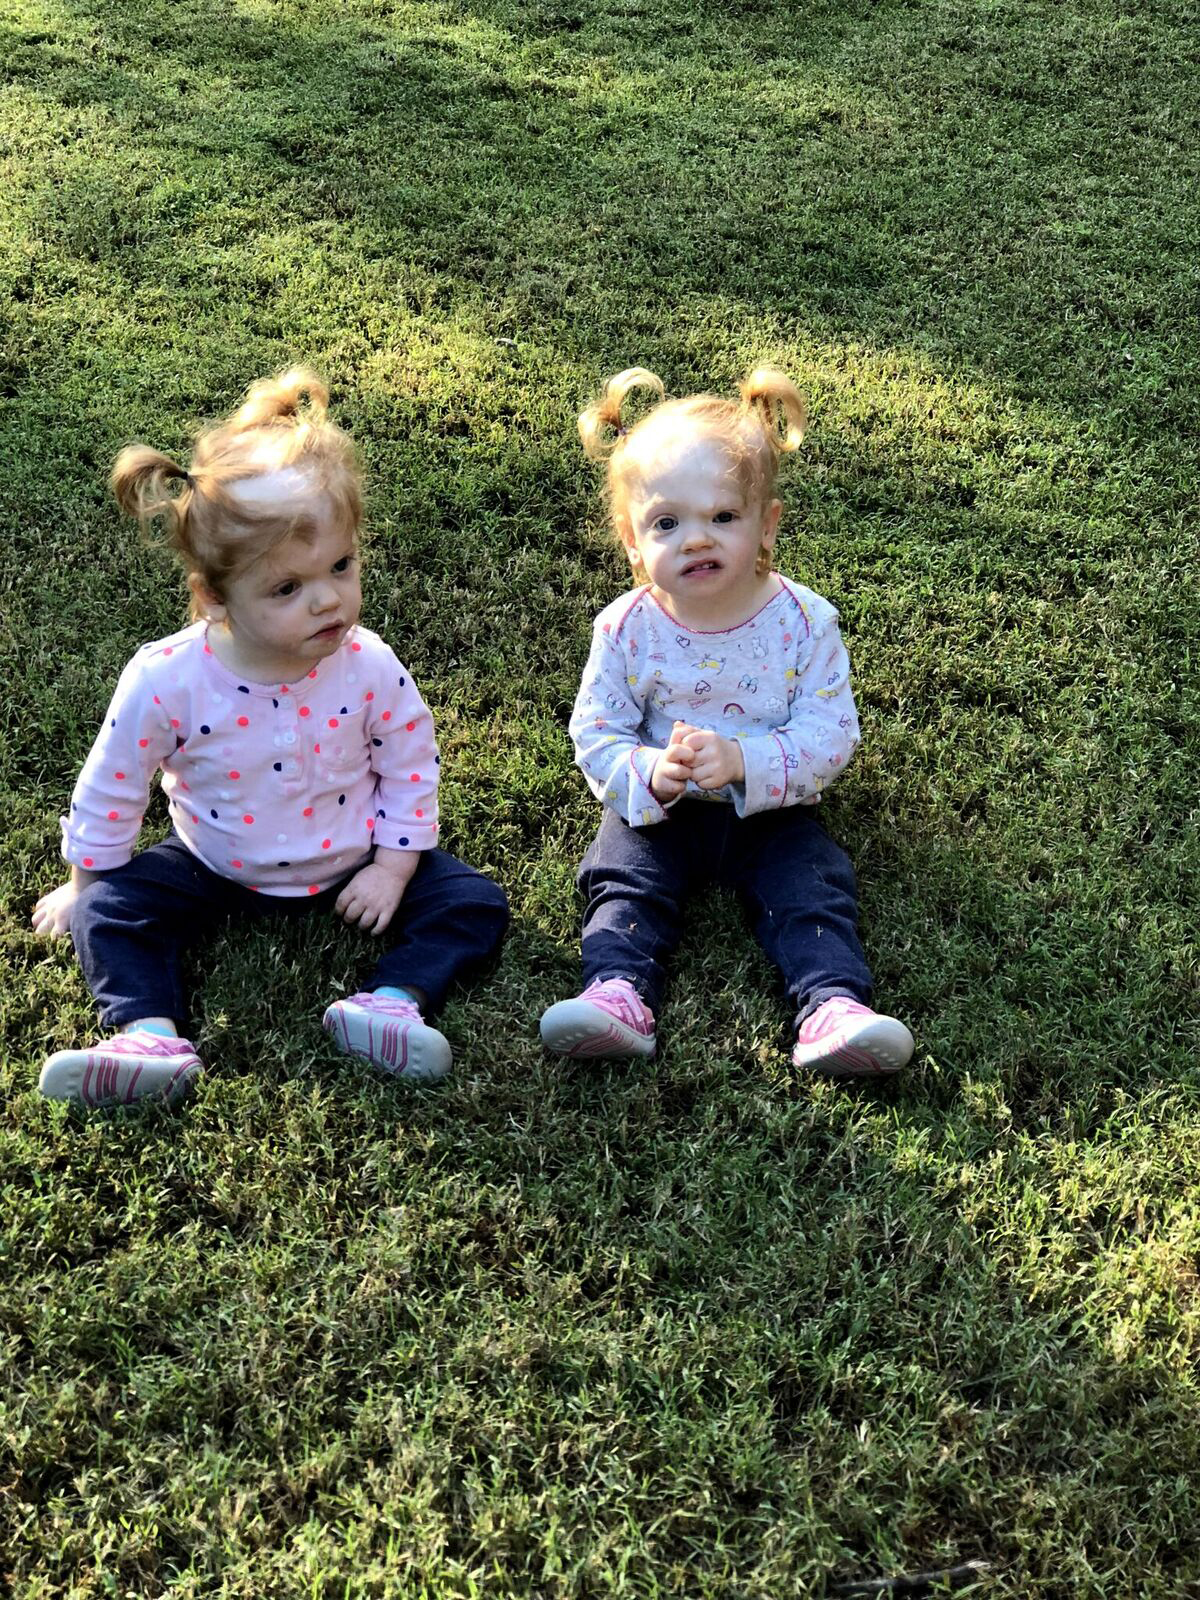 PHOTO: Erin and Abby Delaney are thriving two-year-olds, living with their parents Heather and Riley in Mooresville, N.C.